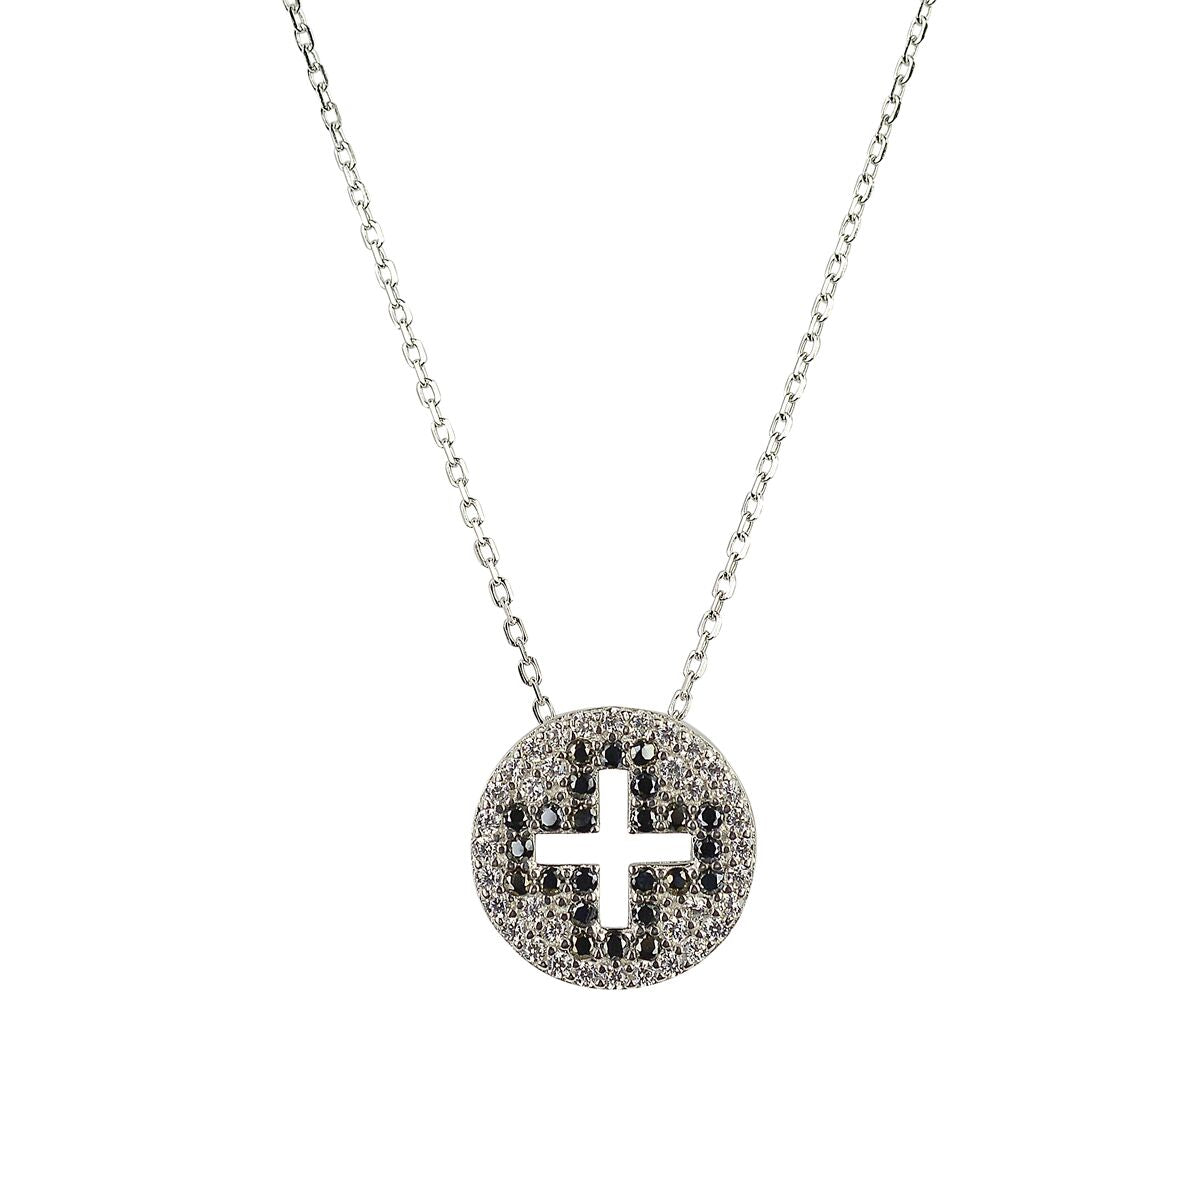 DIVINITY CUT OUT CROSS STERLING SILVER NECKLACE